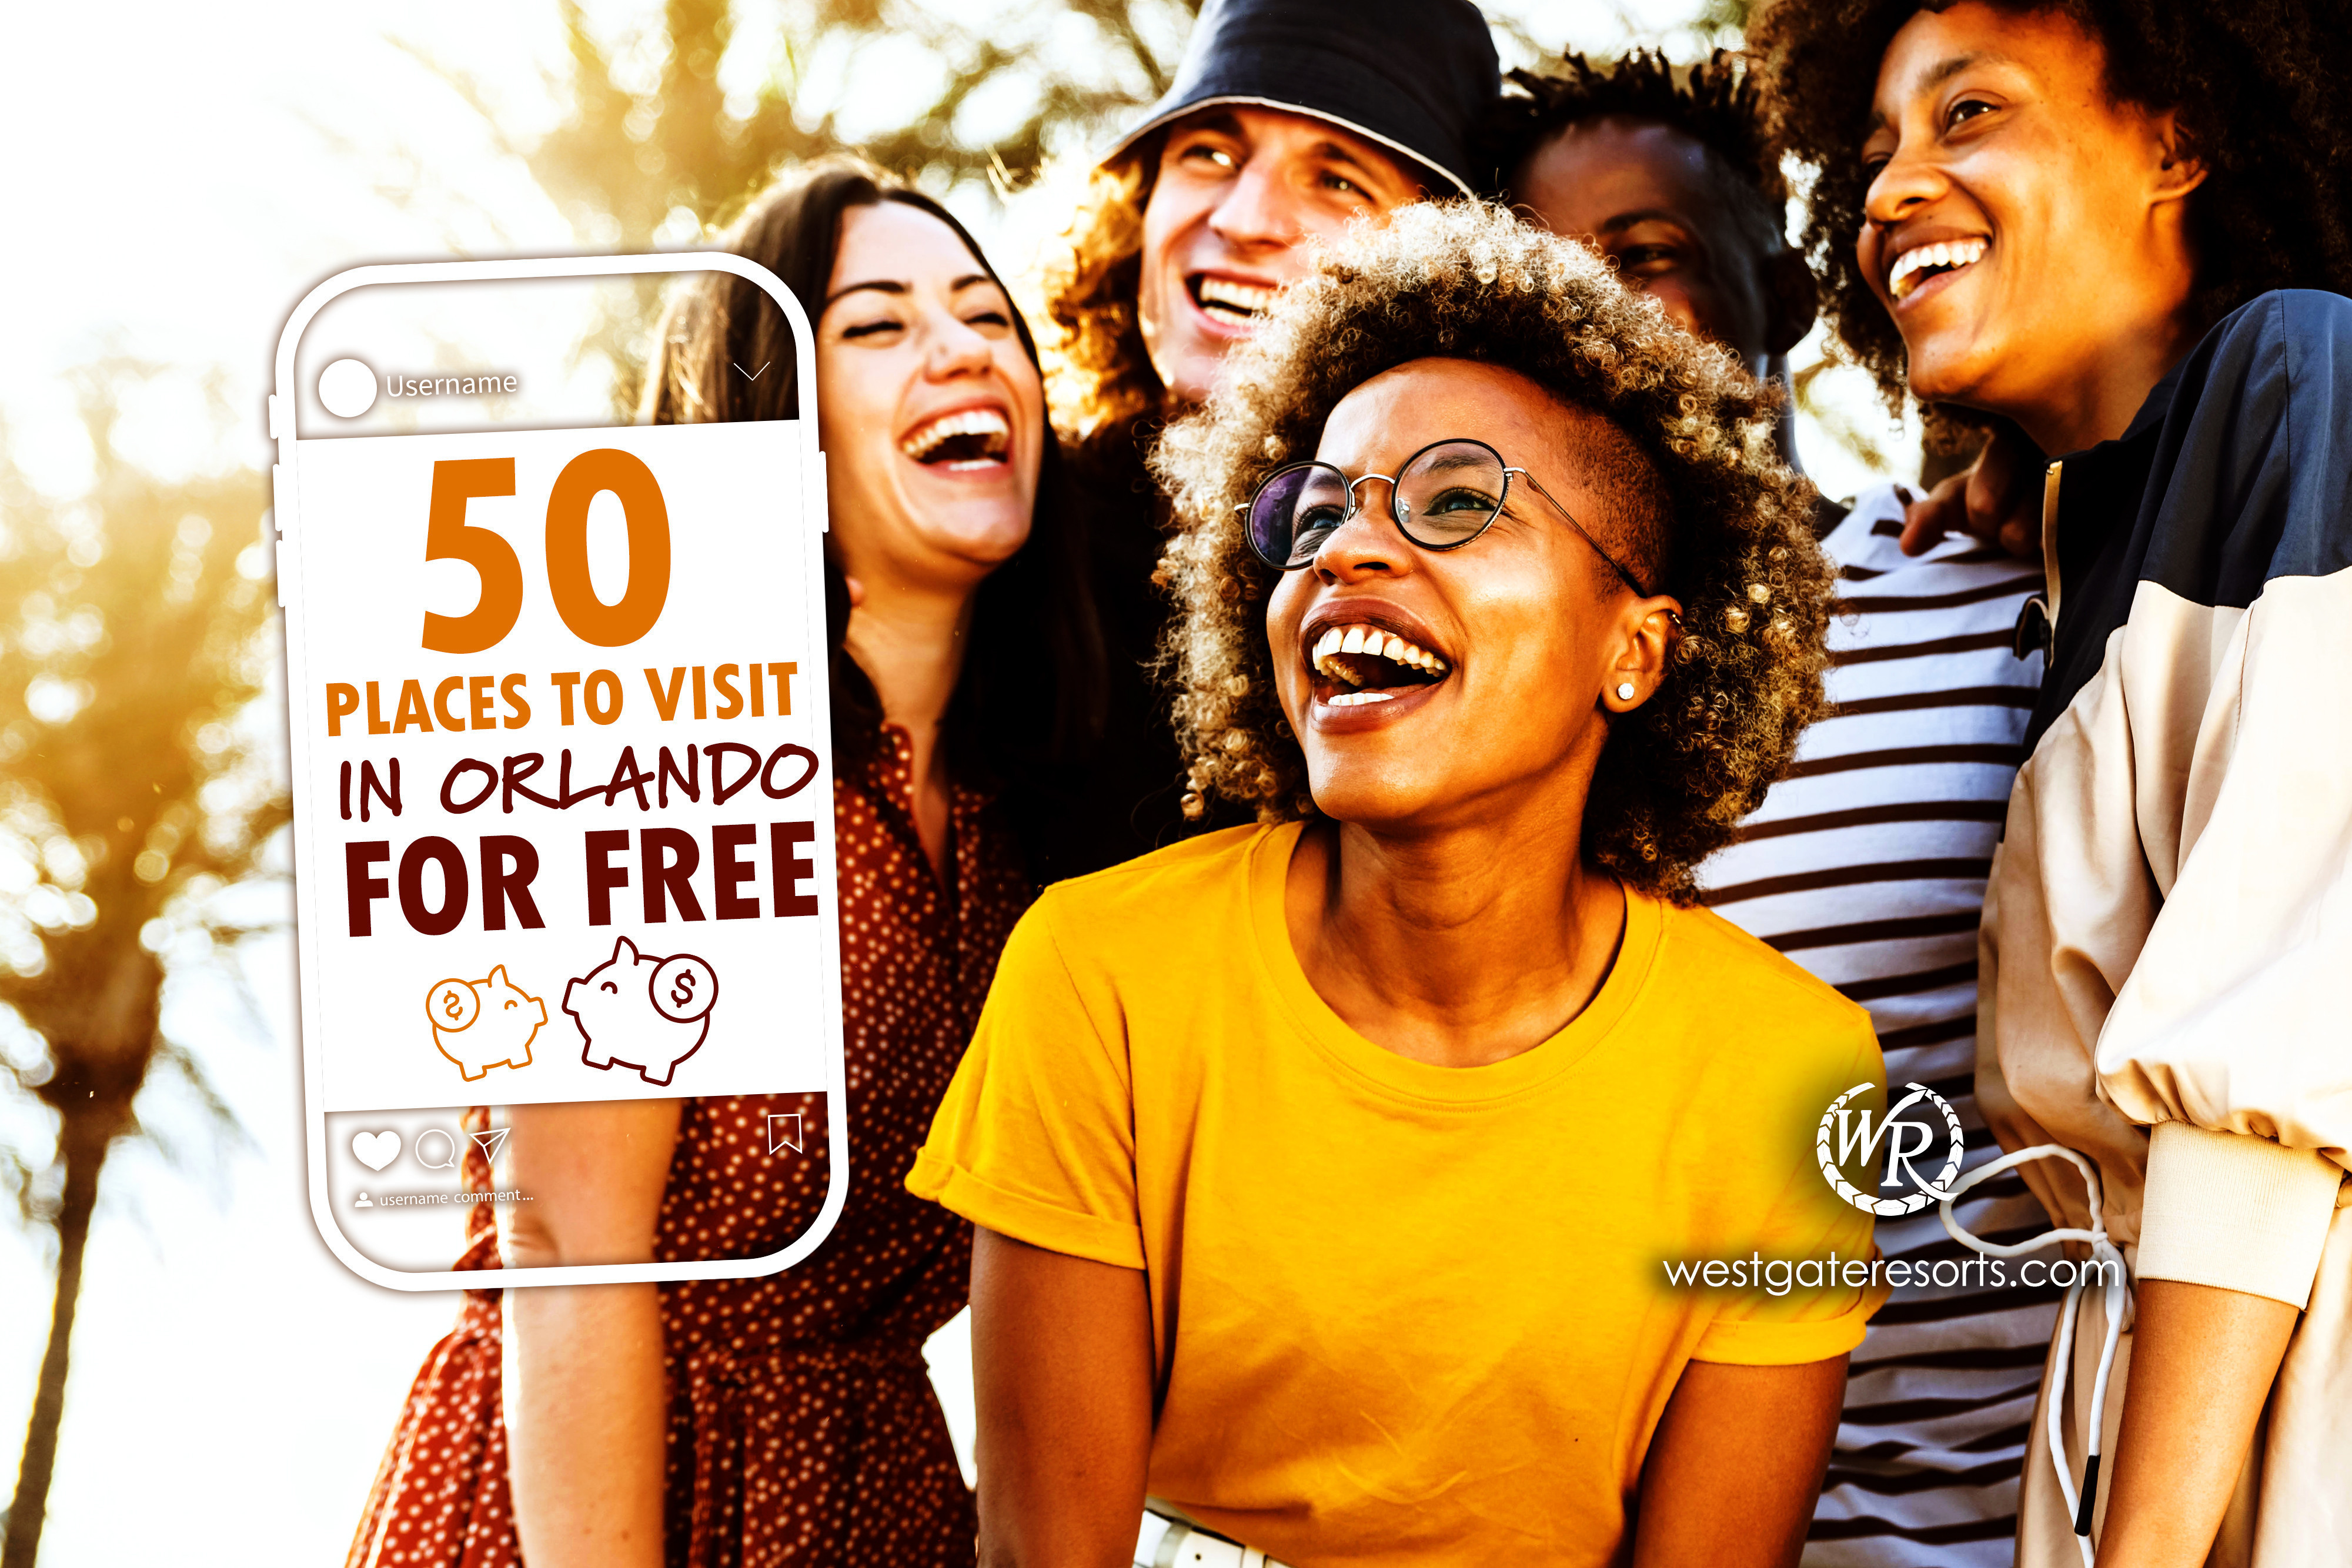 50 Places to Visit in Orlando for Free